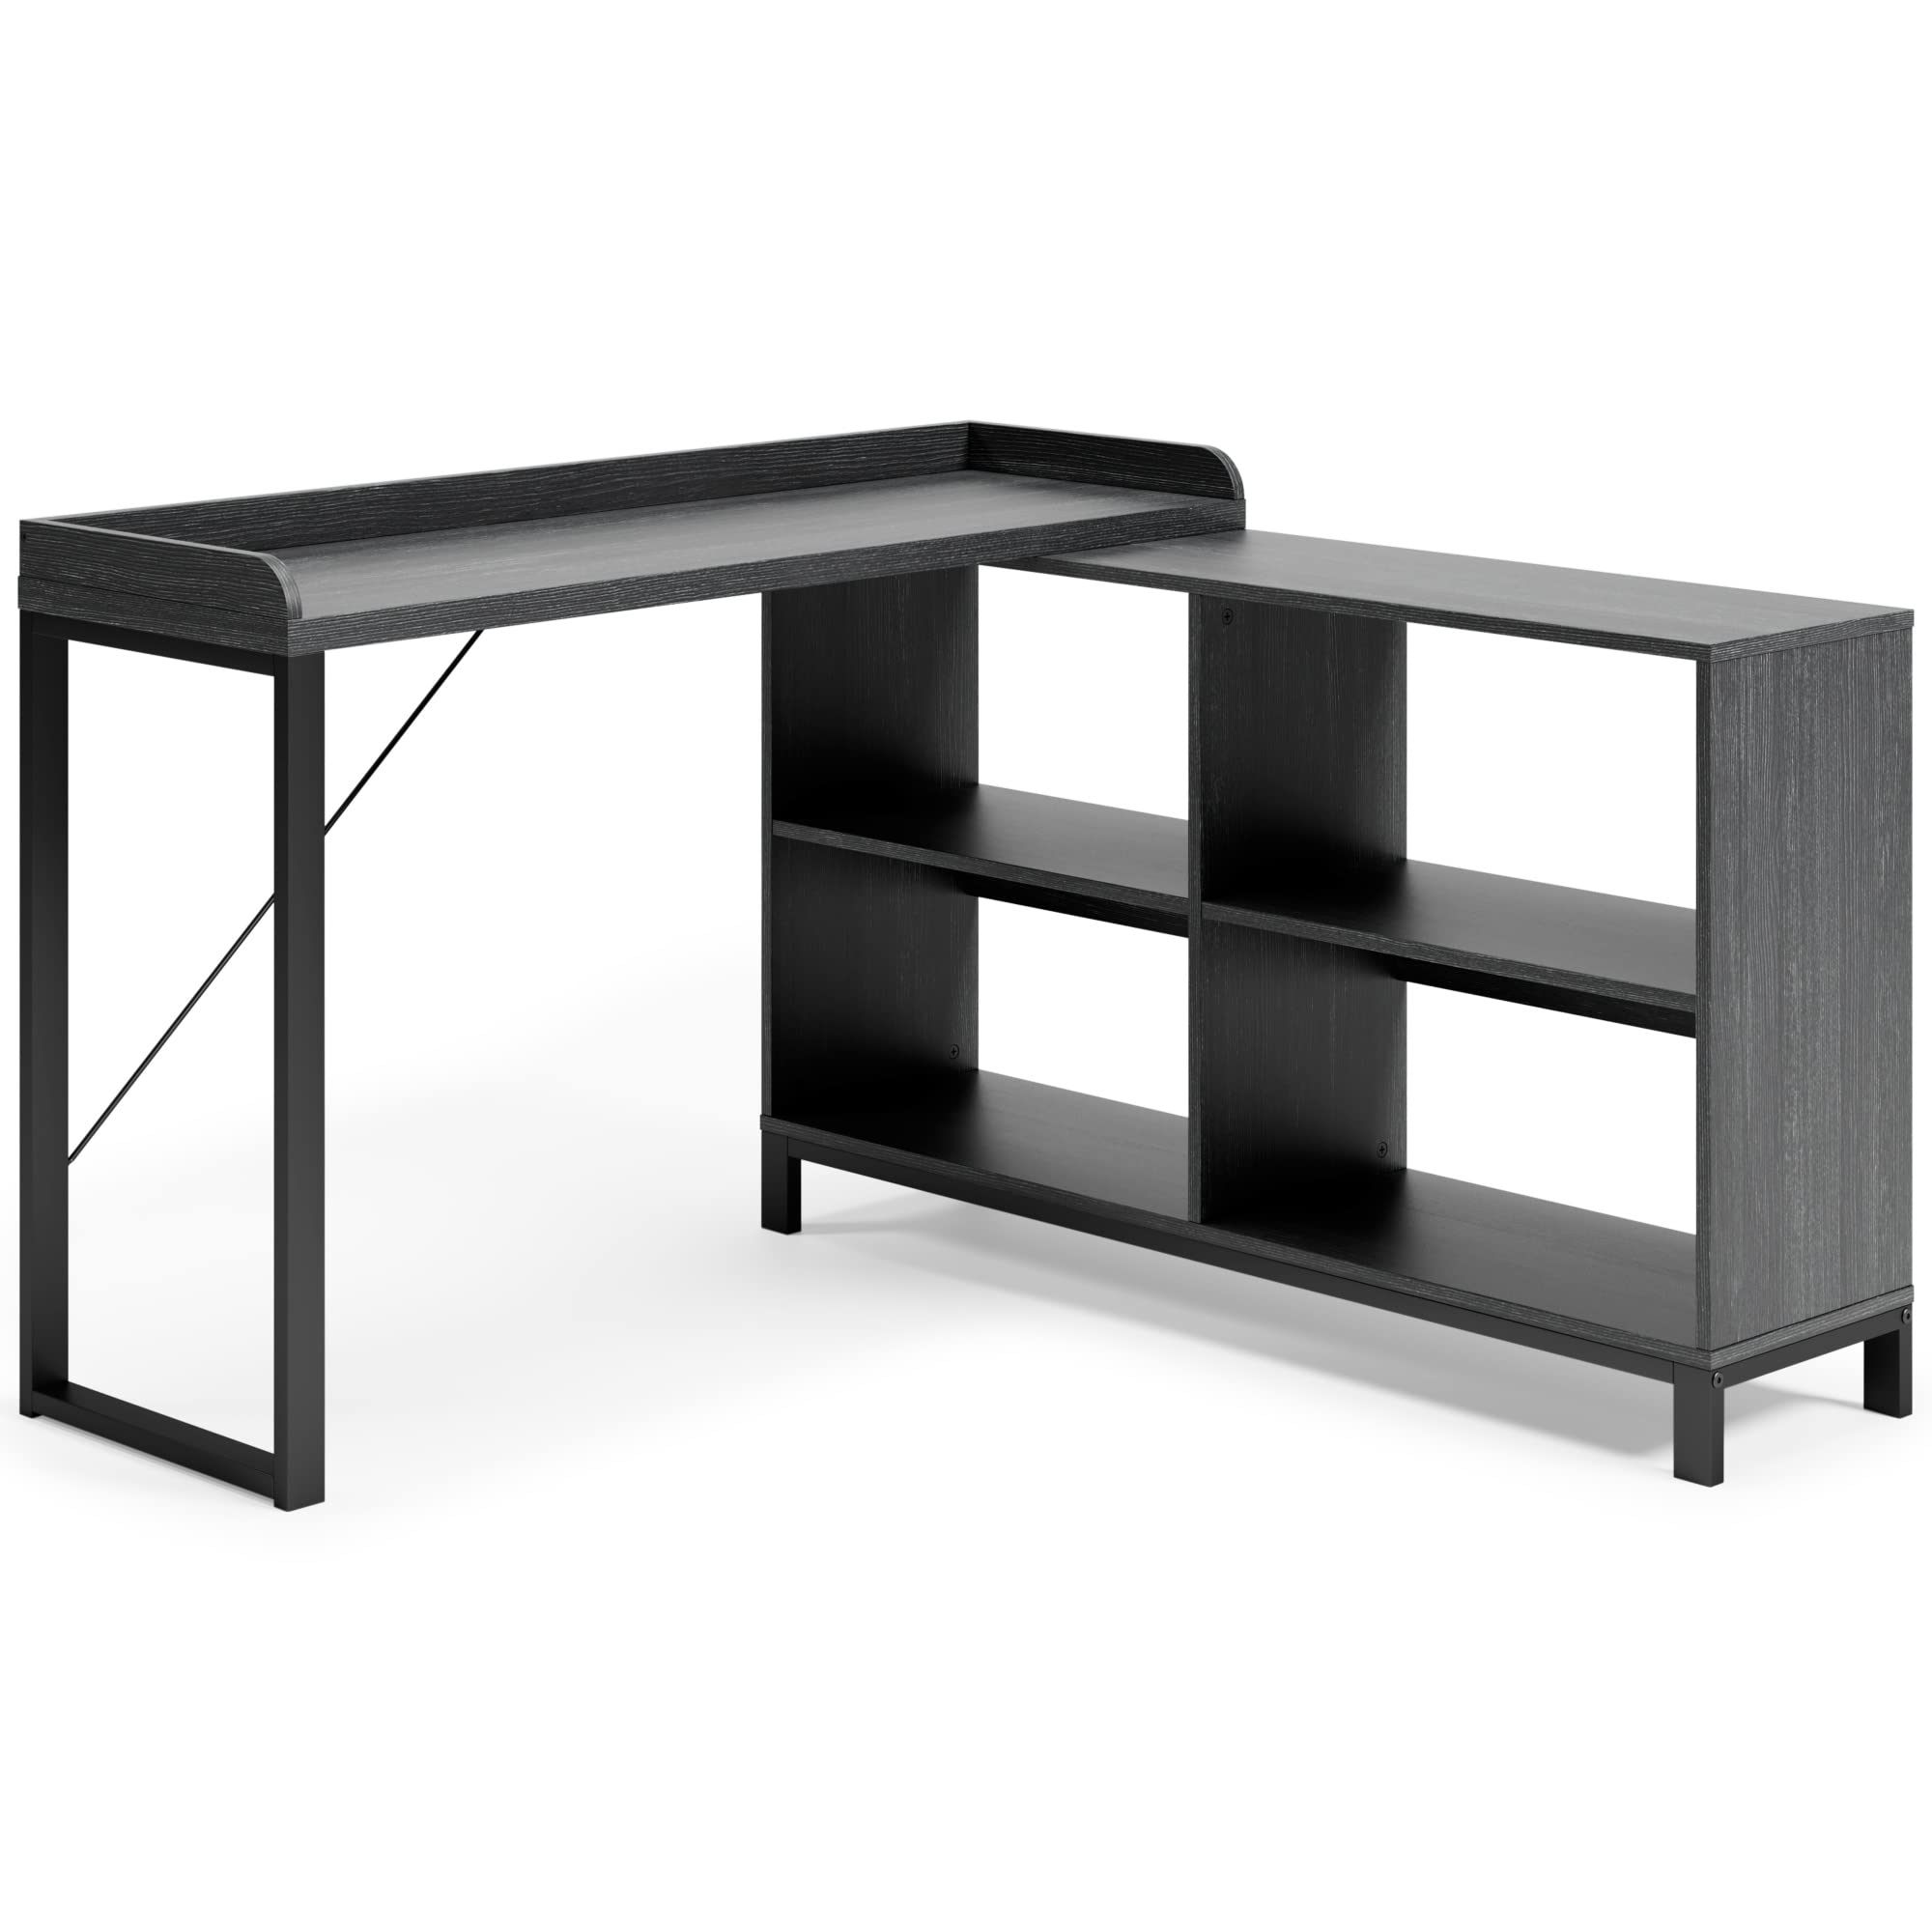 Yarlow Industrial Home Office L-Shaped Desk with Cube Storage